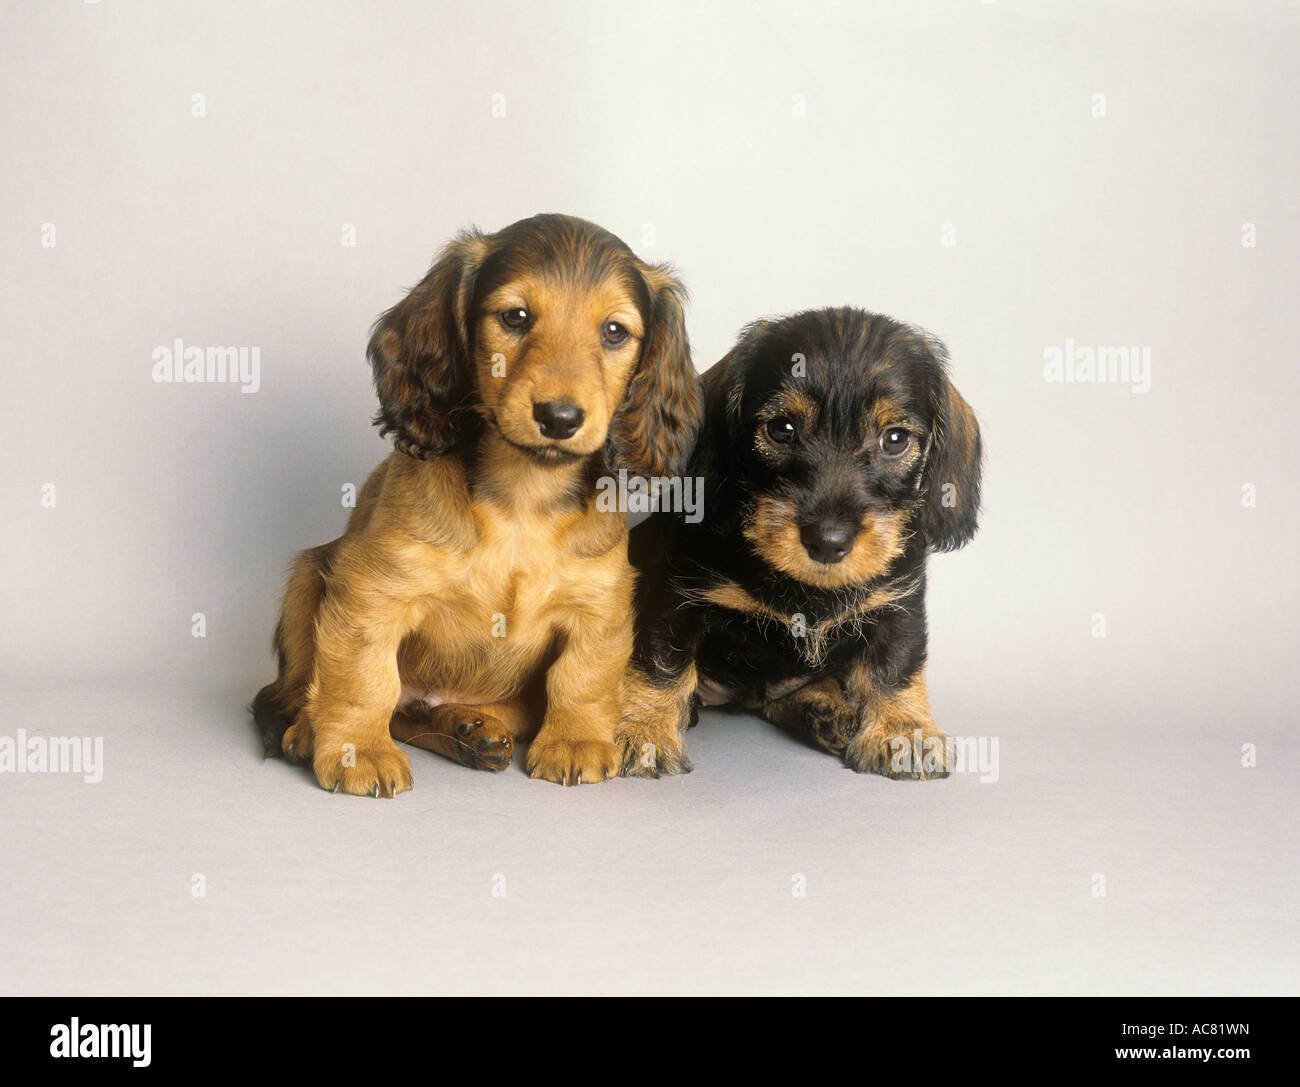 Wire Haired Dachshund Puppy And Long Haired Dachshund Puppy